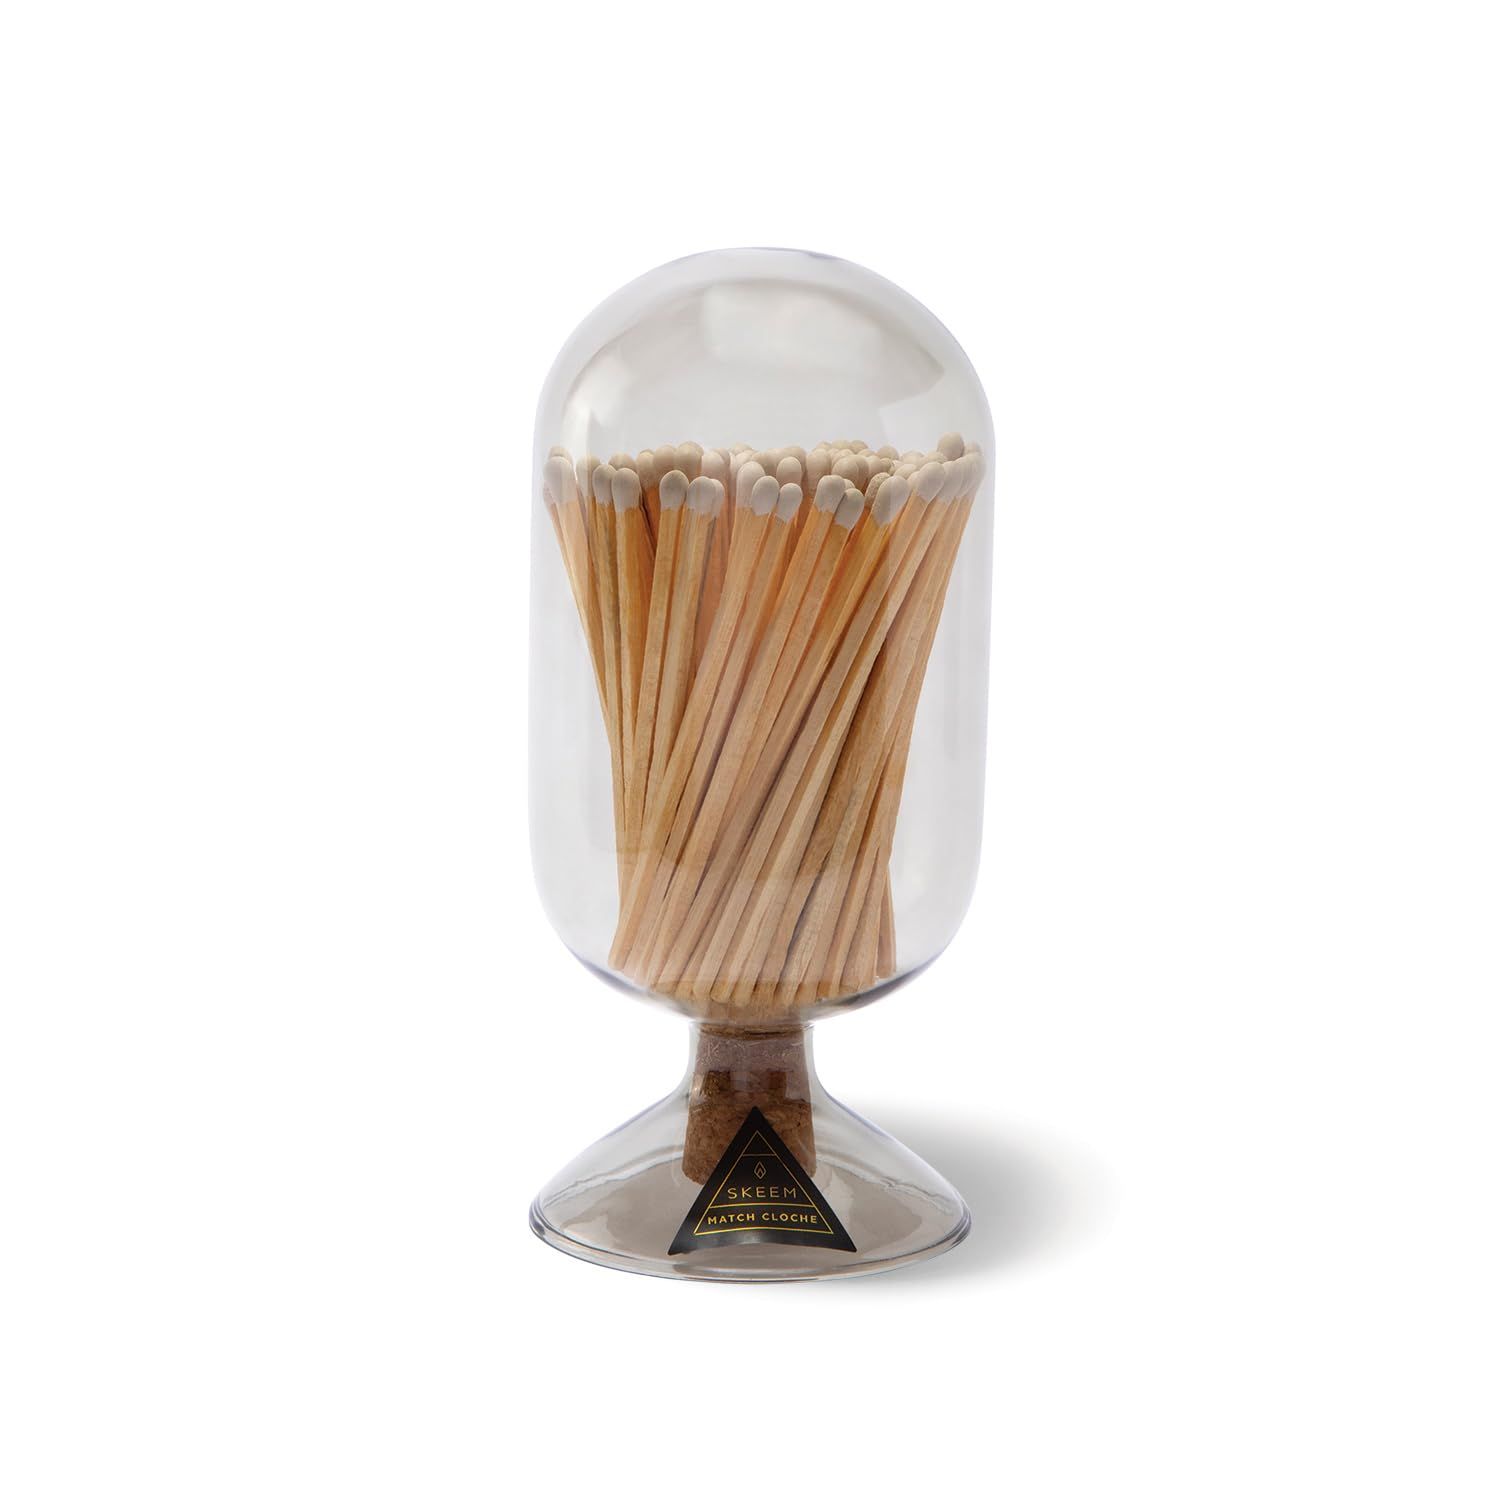 Skeem Glass Match Cloche with Striker - Smoke - Includes 120 Small Match Sticks - Perfect Fireplace Decor, Decorative Matches for Candles | Amazon (US)